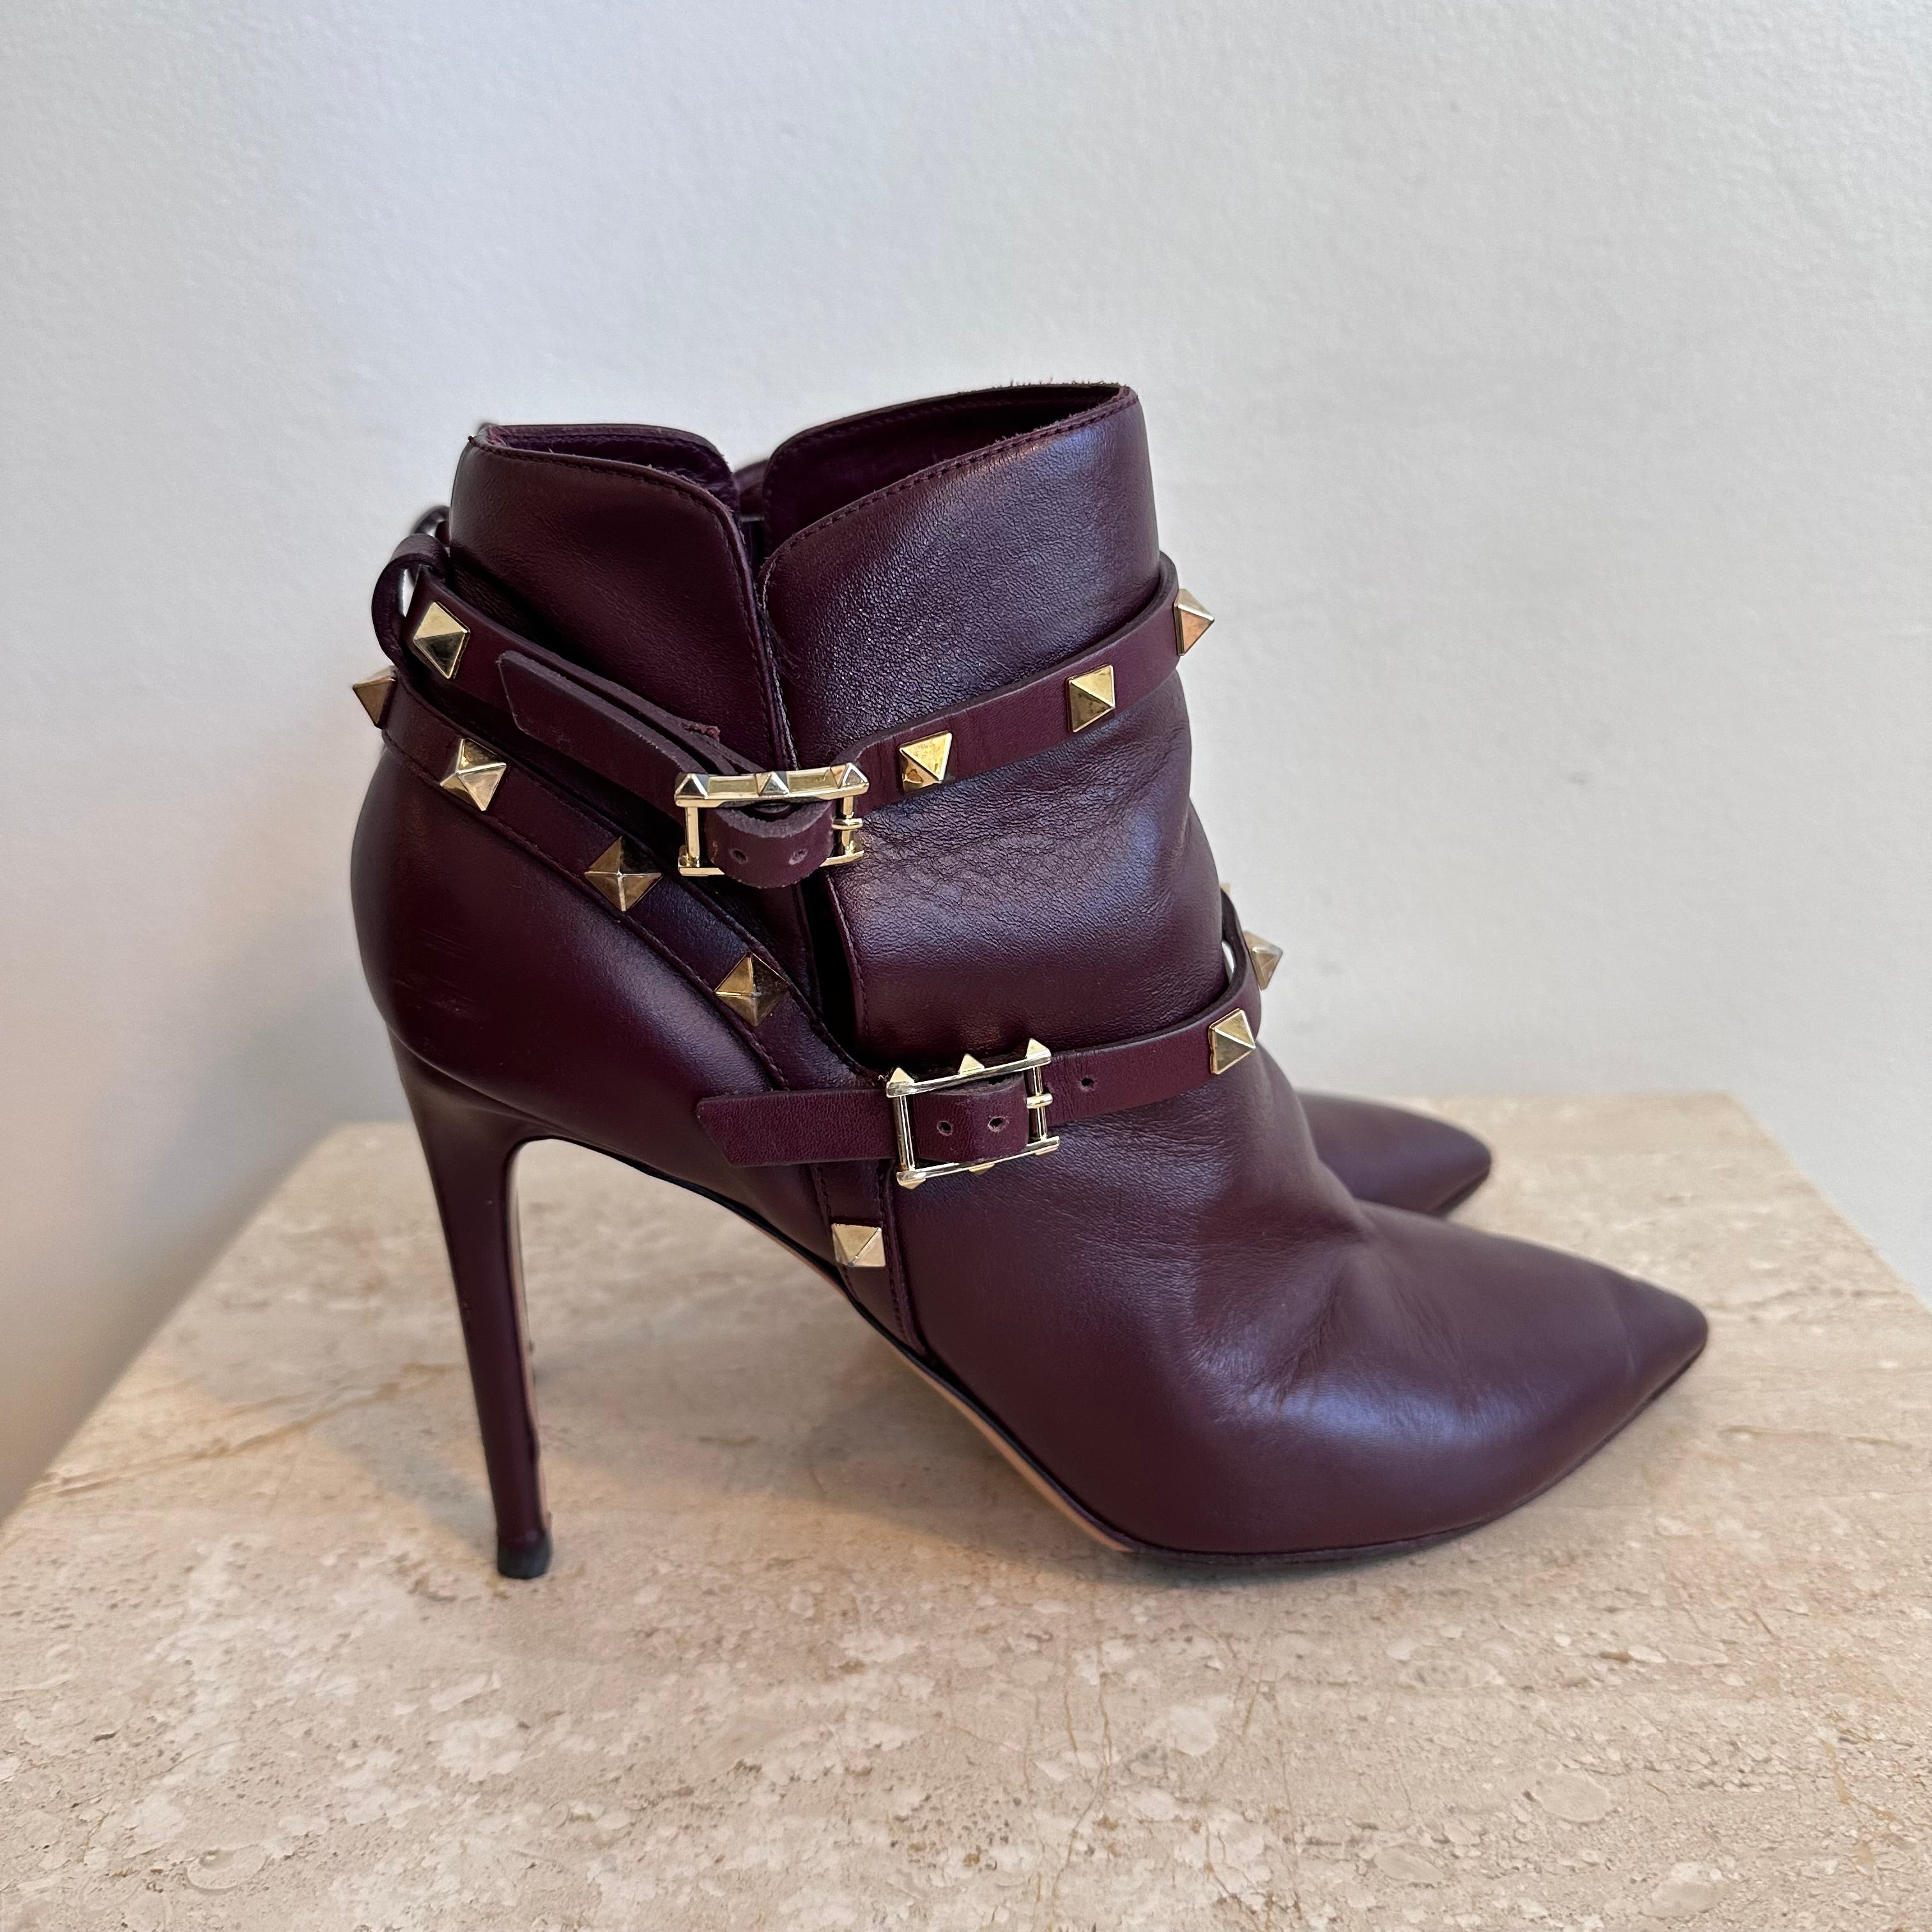 Pre-Owned VALENTINO Leather Boots in Burgundy Size 39.5